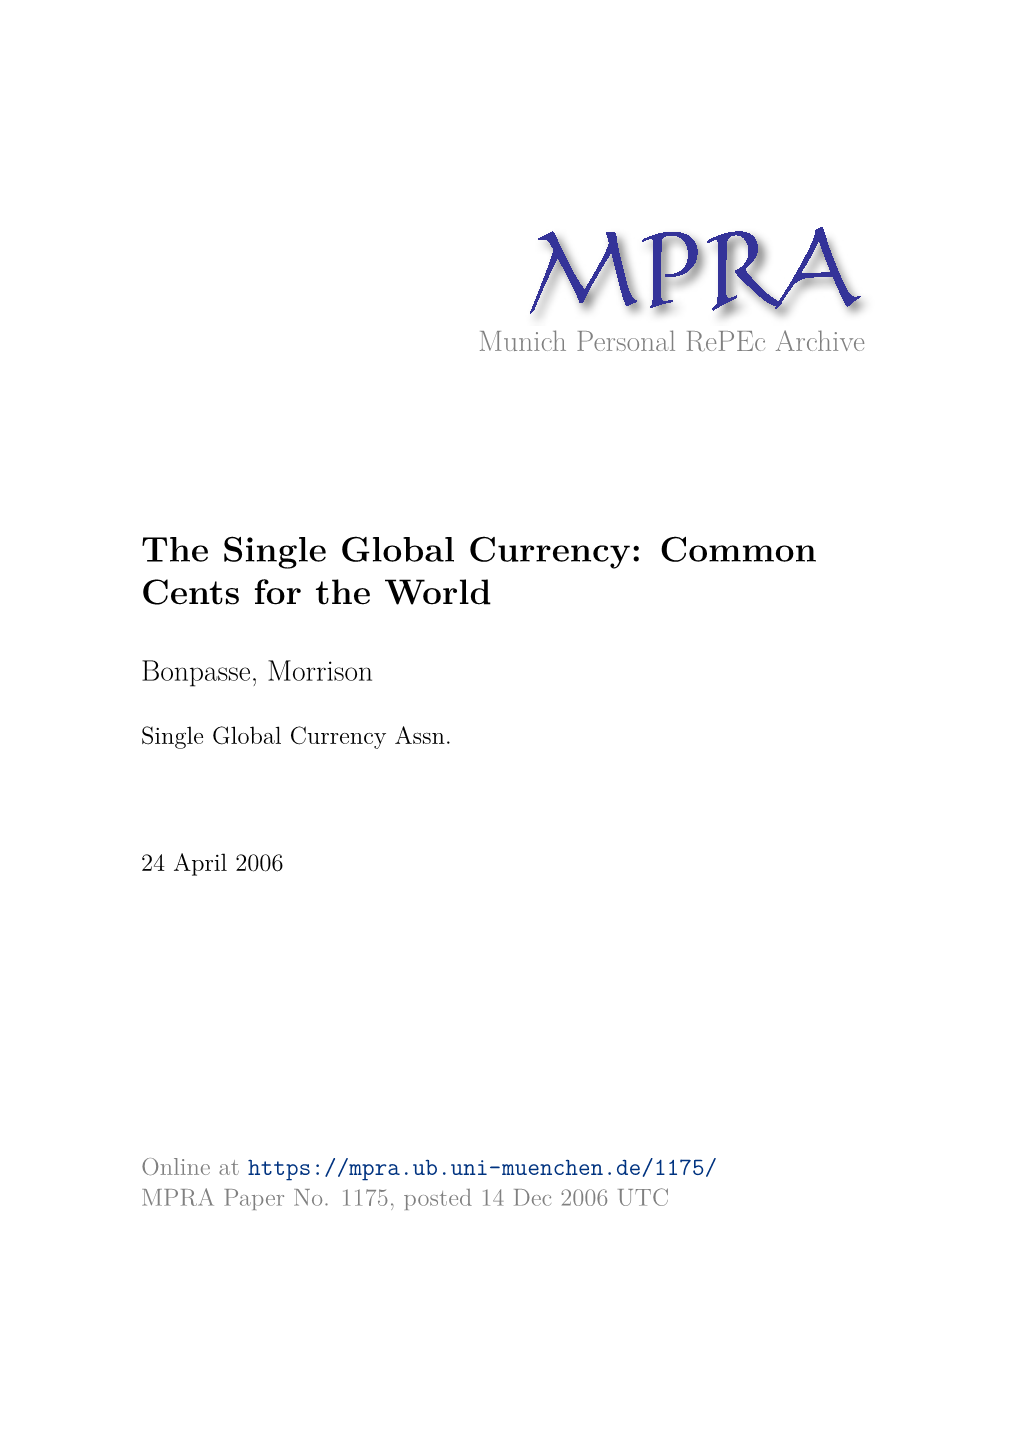 The Single Global Currency: Common Cents for the World